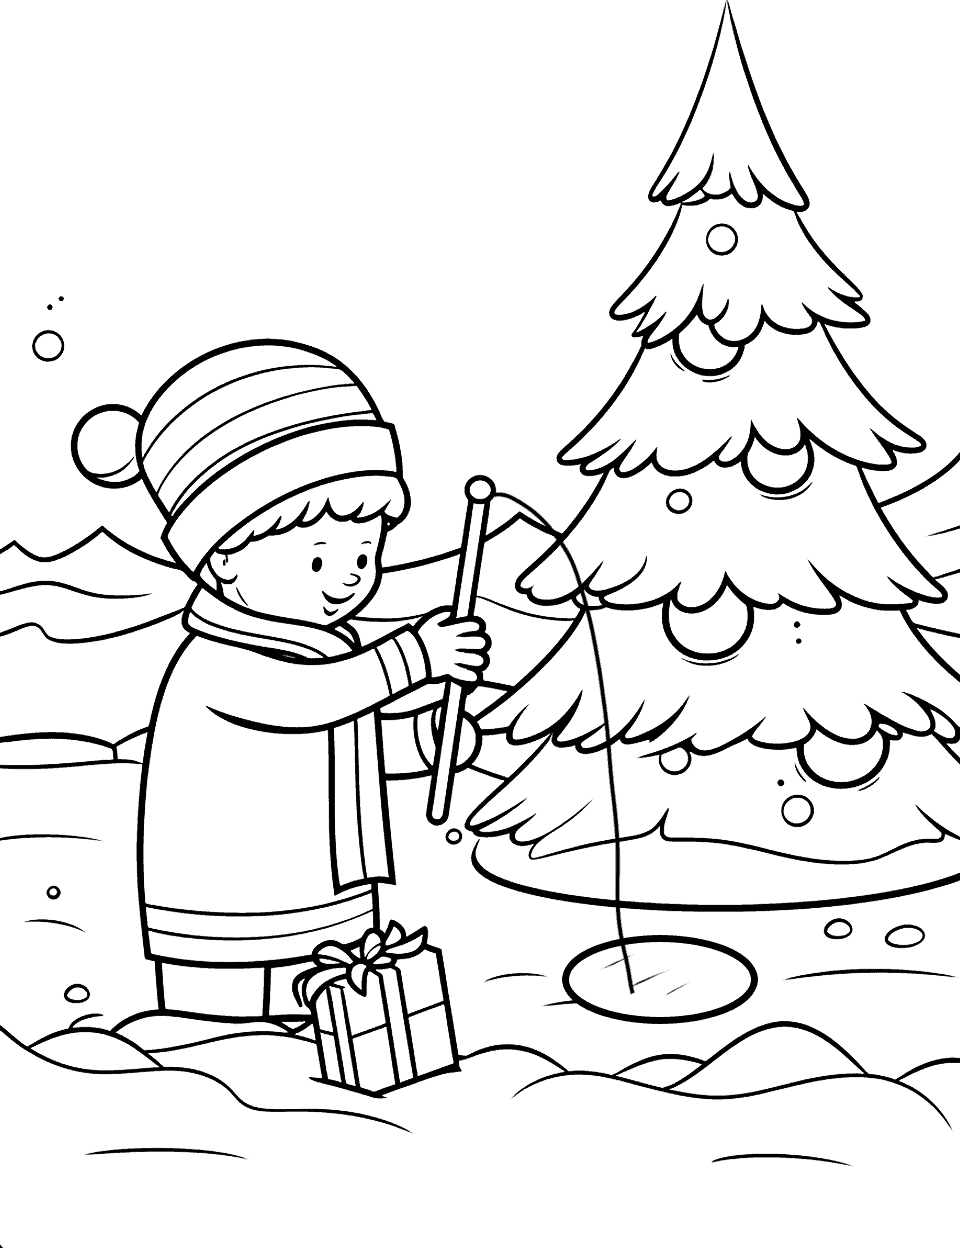 Christmas Fishing Trip Coloring Page - A child fishing in a hole in a frozen pond, catching a Christmas present.